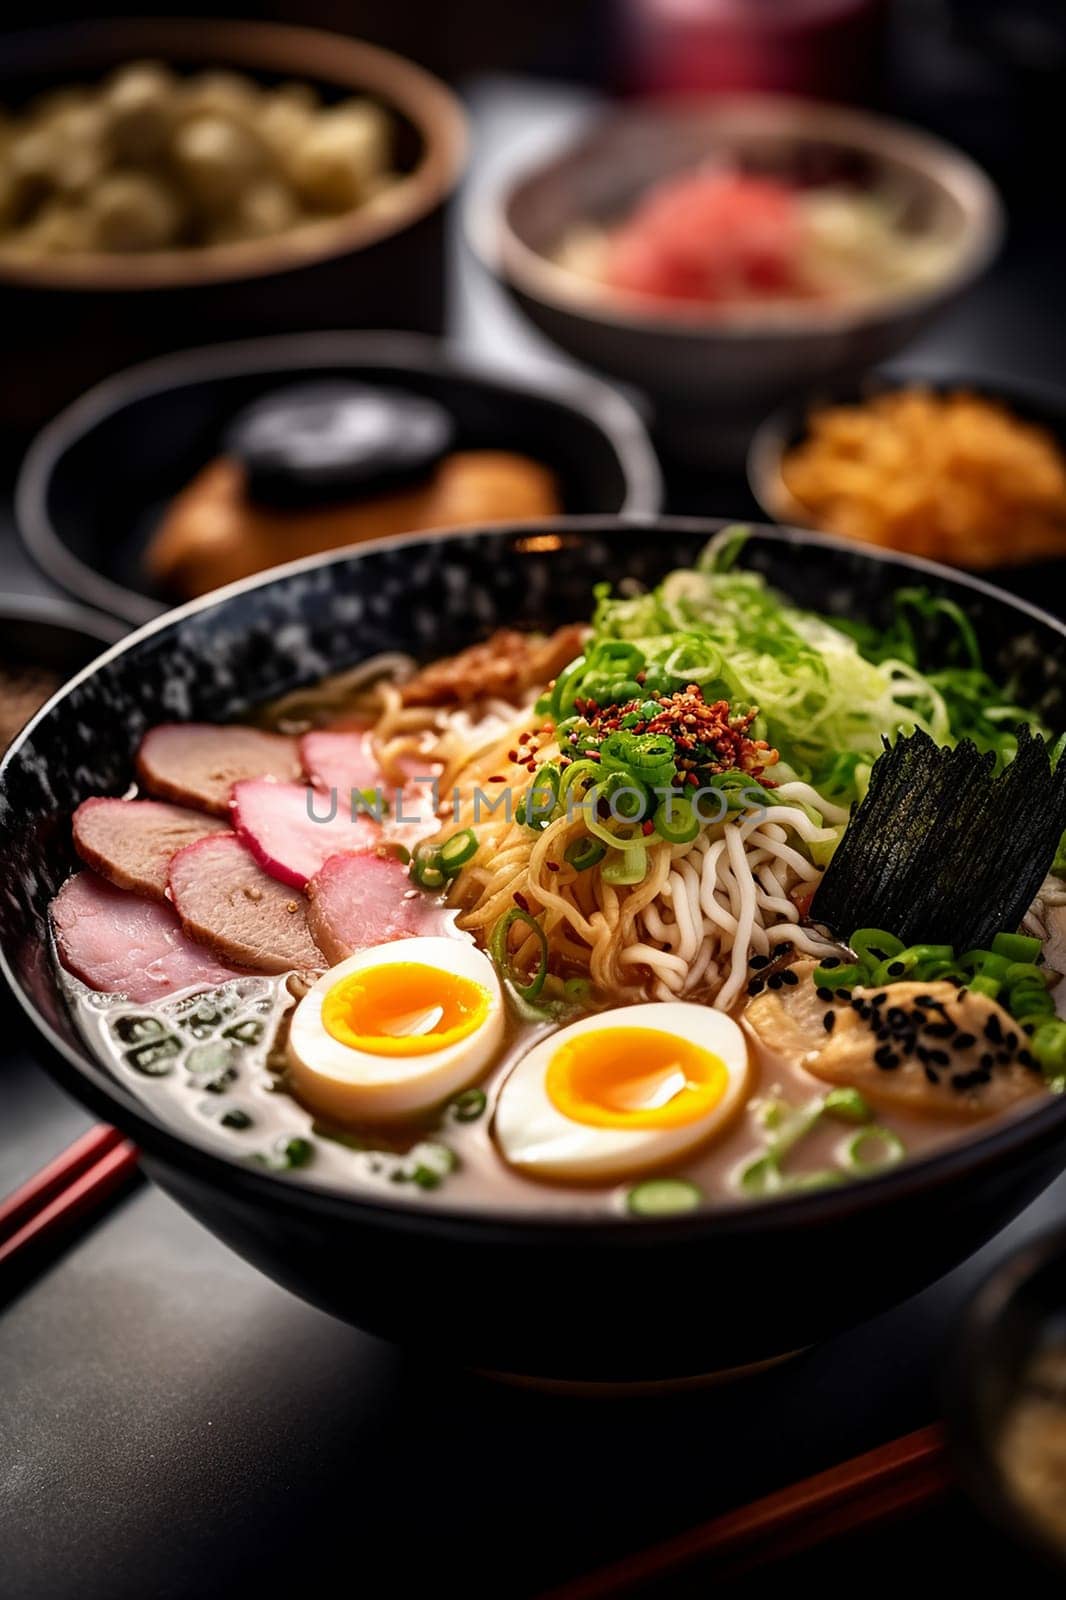 A bowl of ramen with eggs, meat, and vegetables.